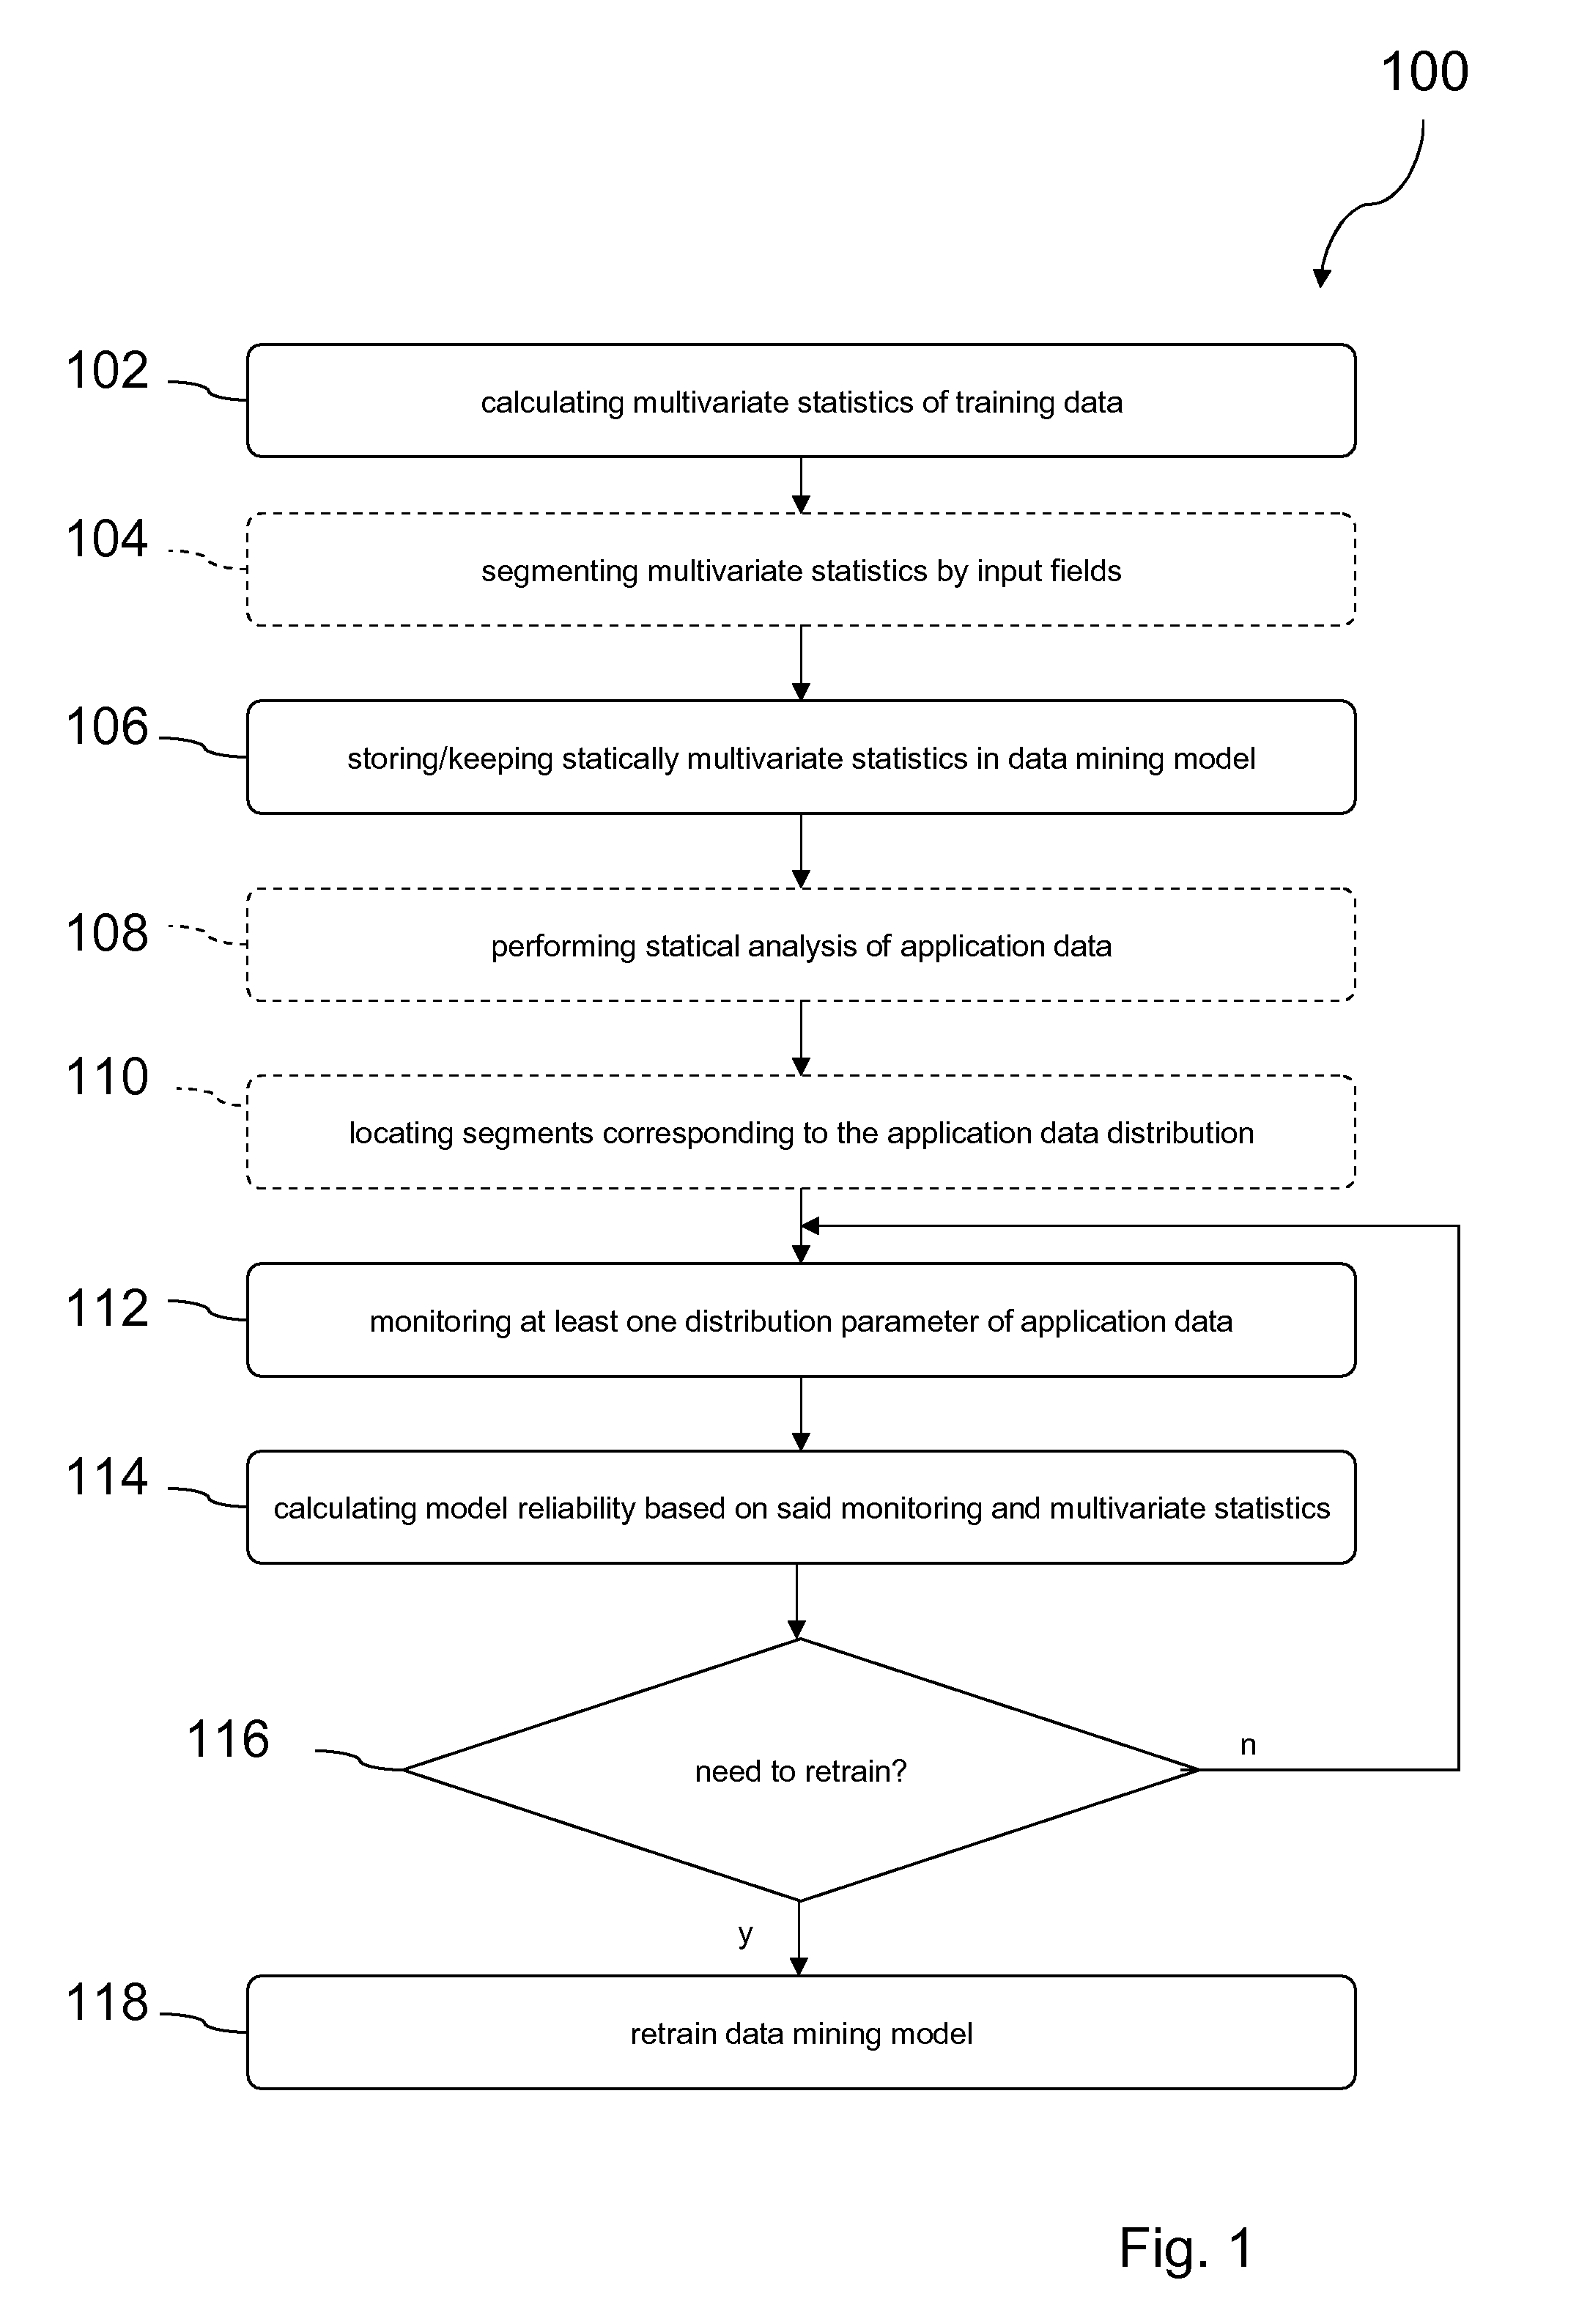 Method for determining a time for retraining a data mining model